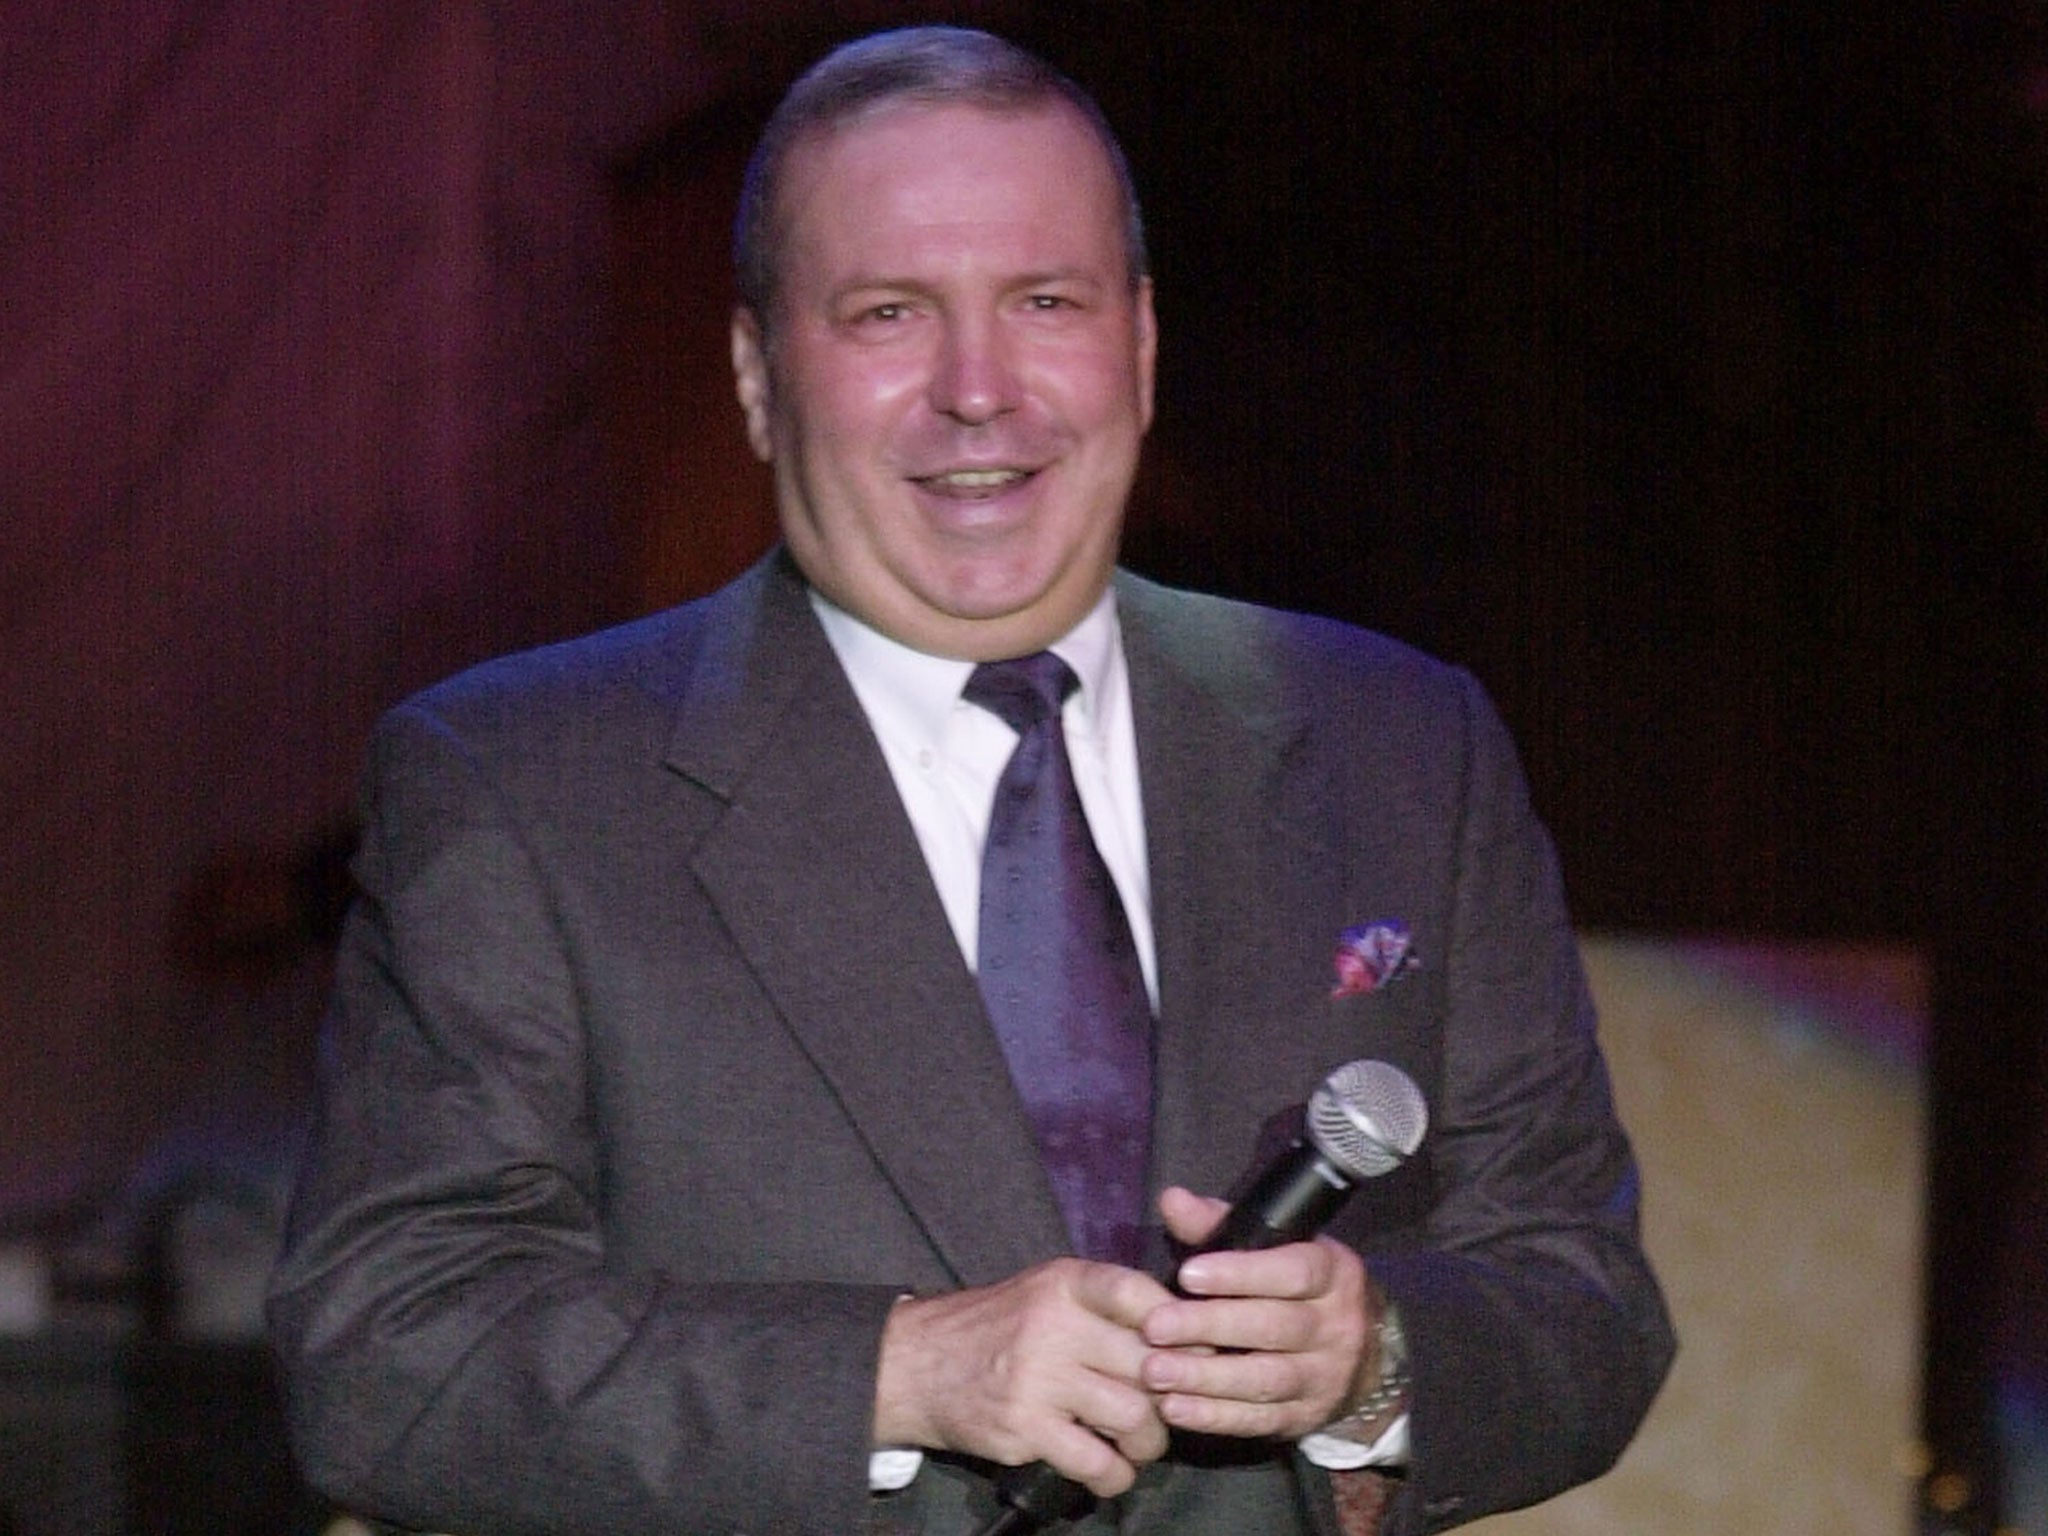 Frank Sinatra Jr pictured in 2001